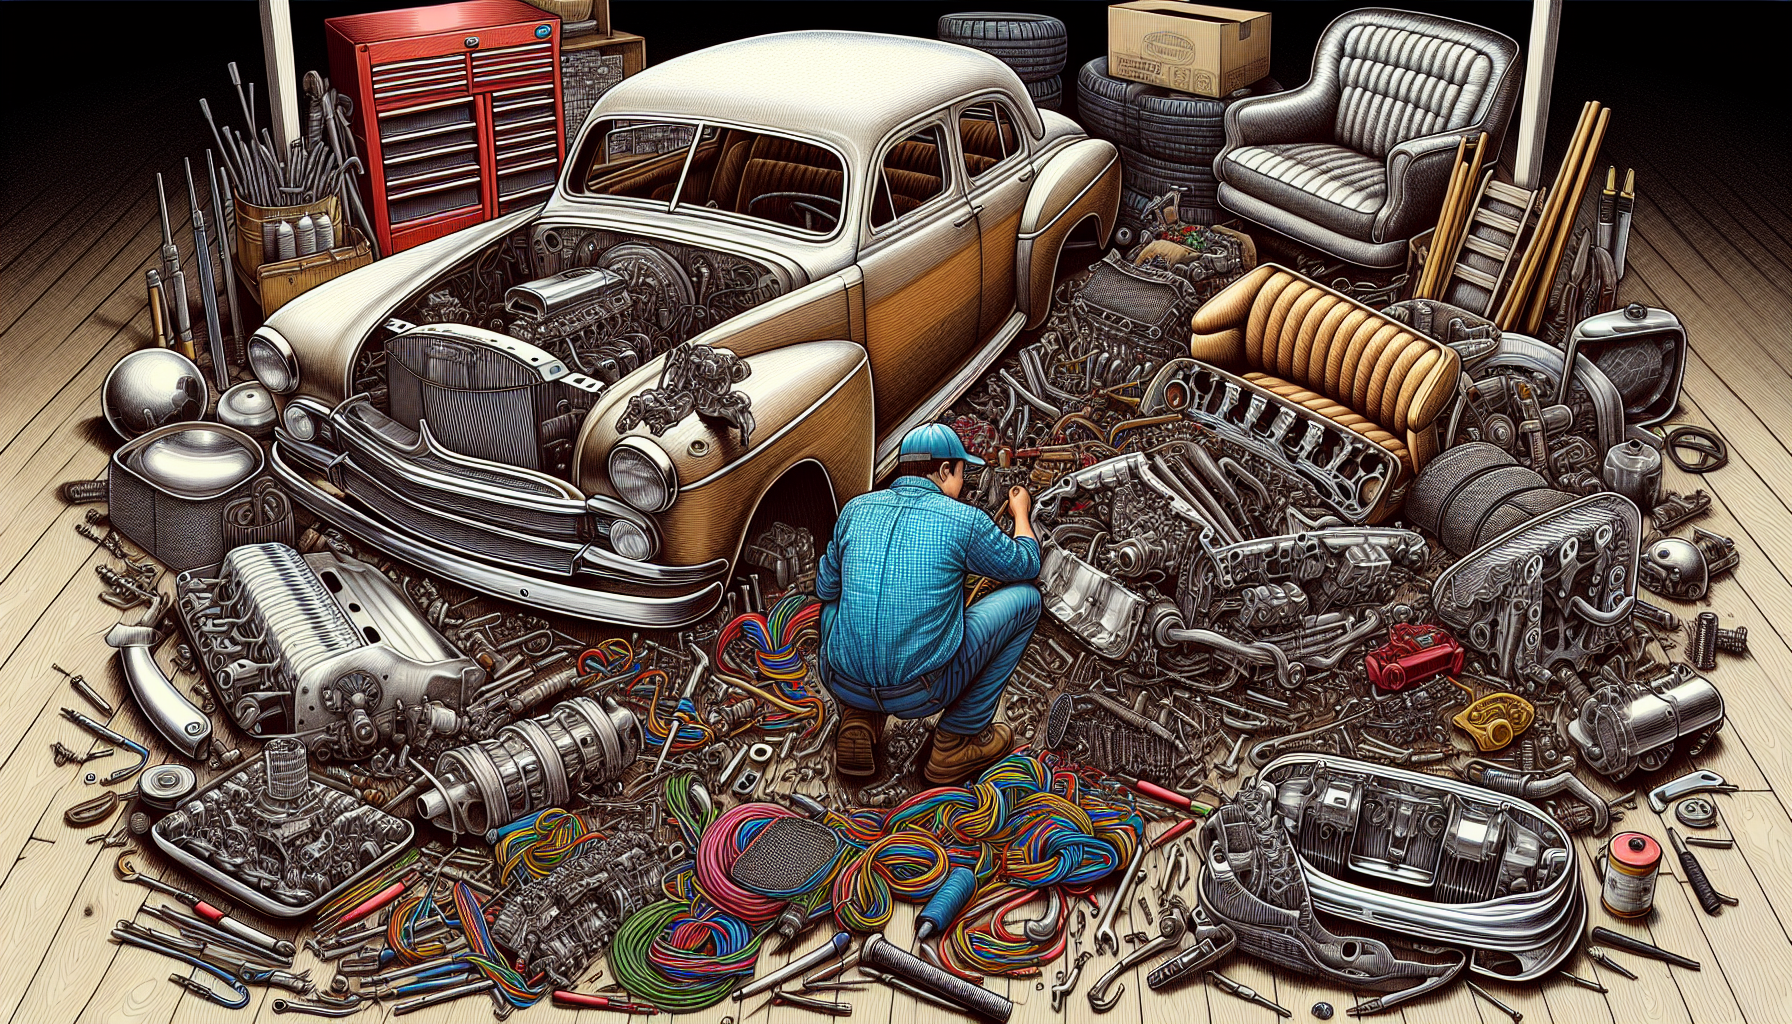 Person dismantling a car and sorting parts